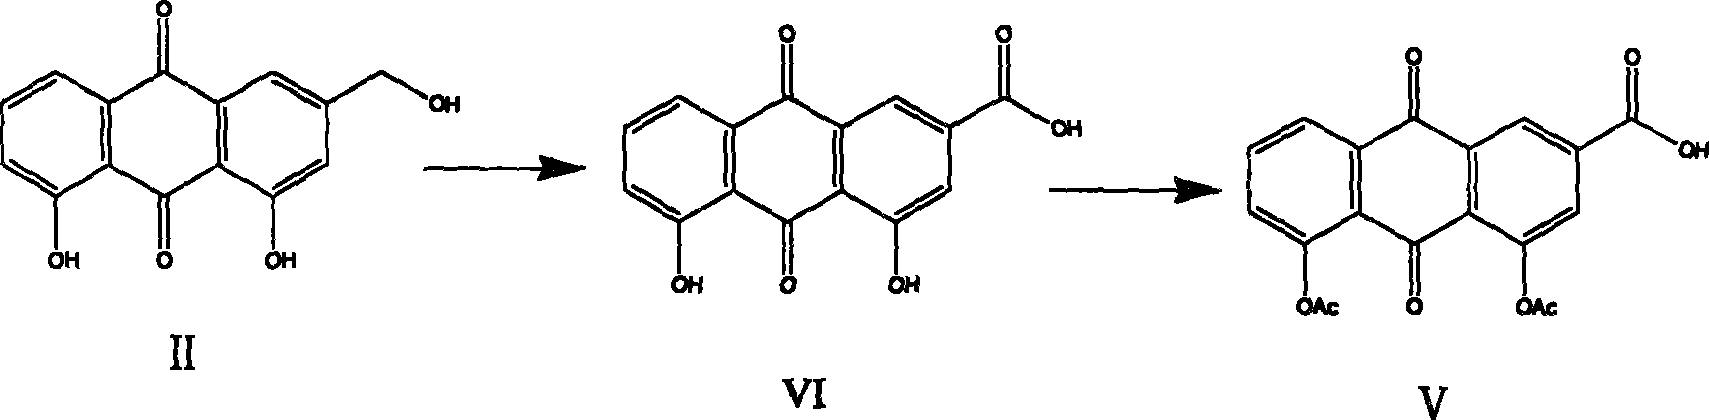 Technique for preparing diacerein by two-step oxidation process